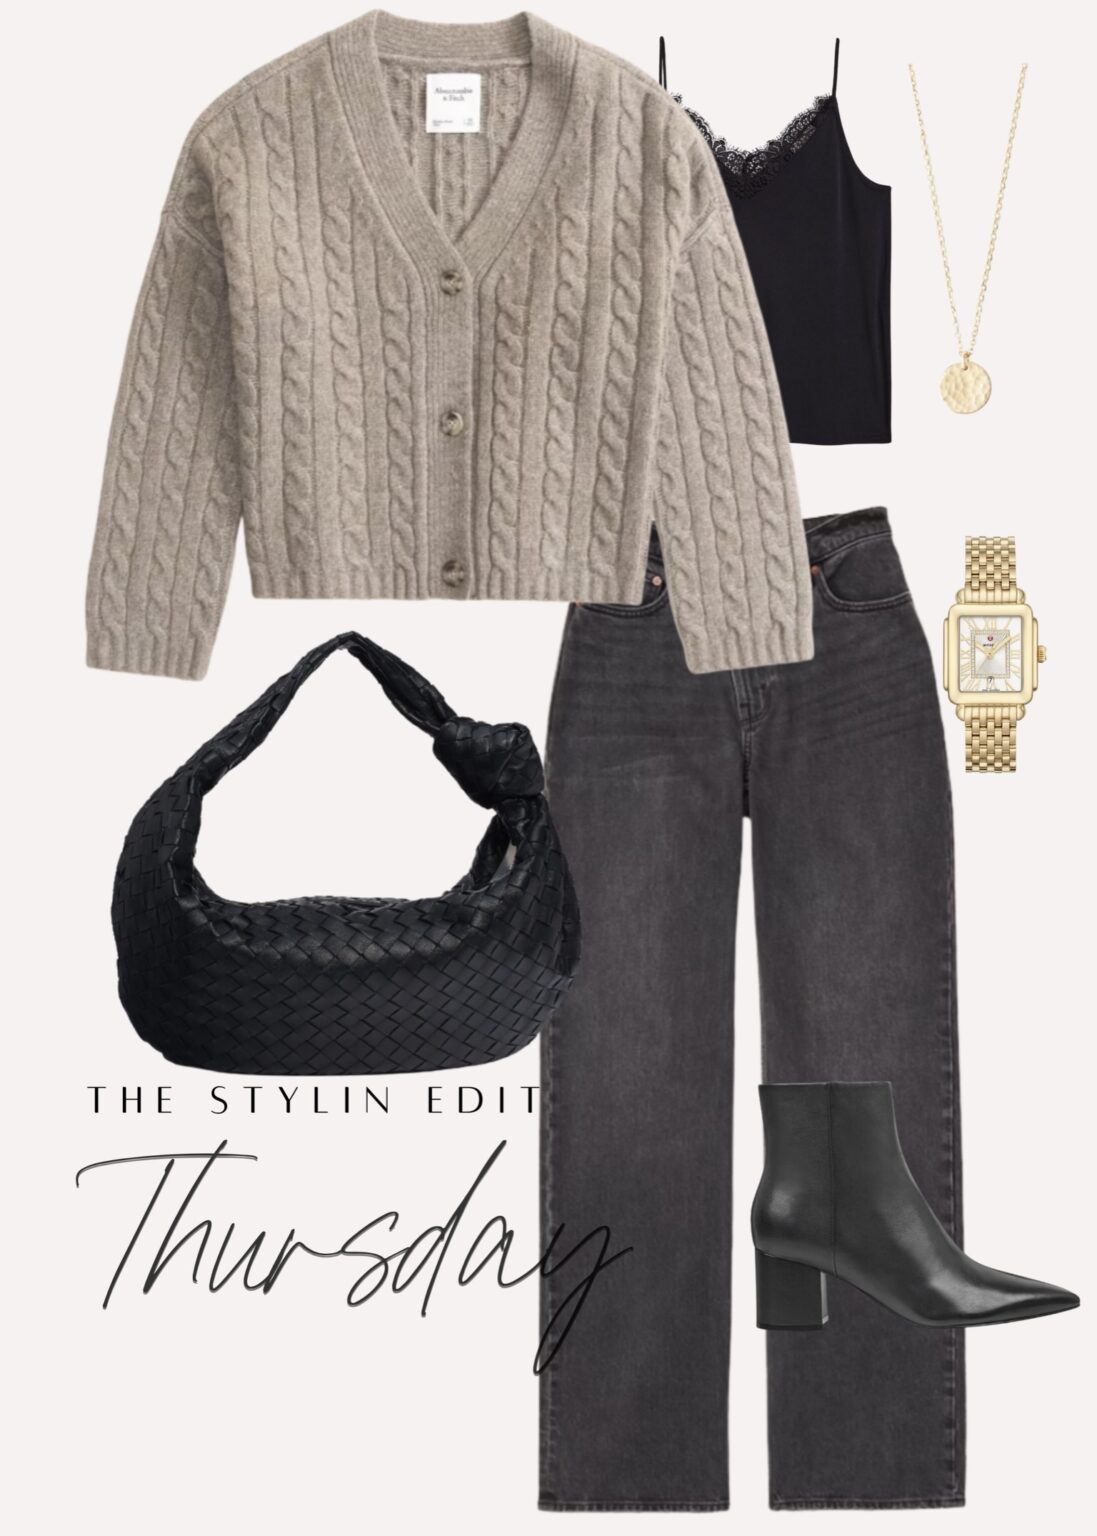 OUTFITS OF THE WEEK 10/1 - Stylin by Aylin